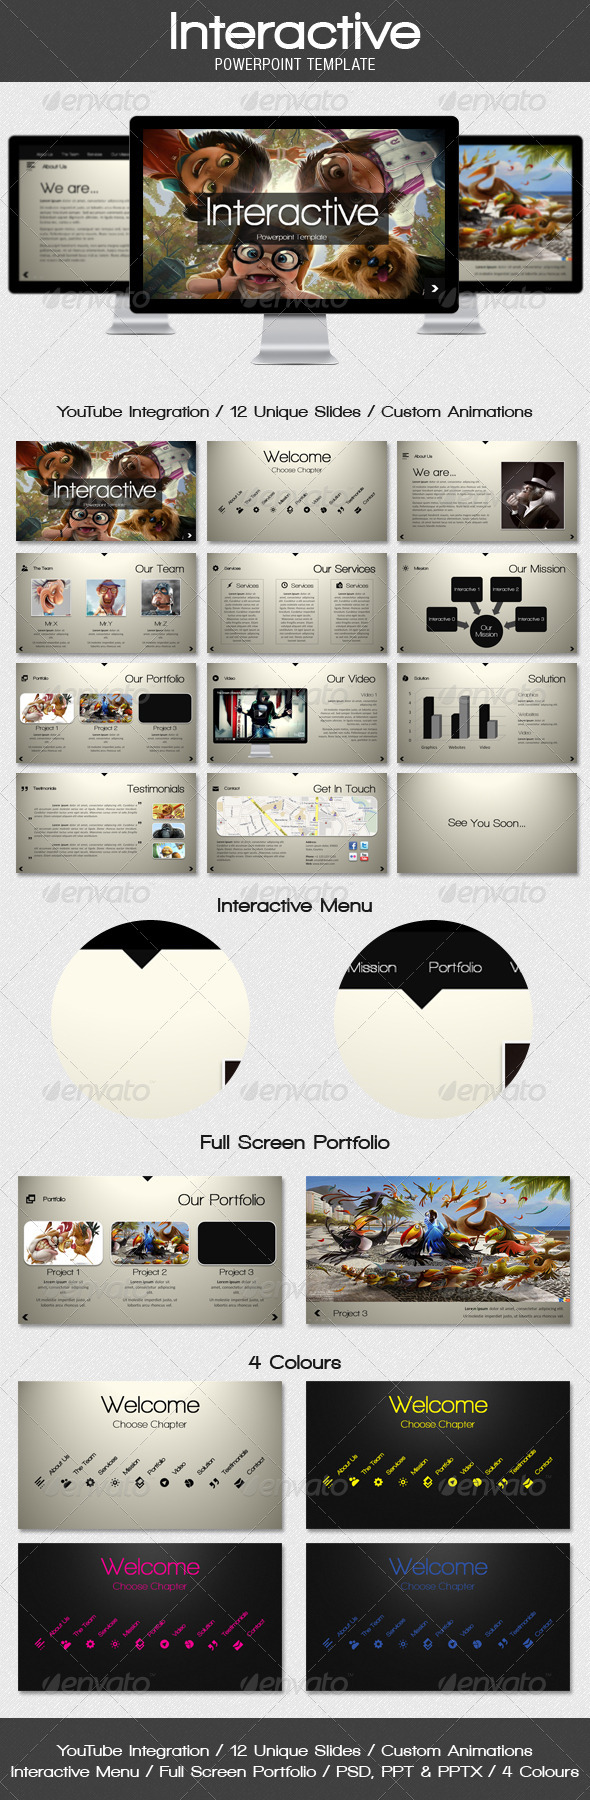 Interactive - Powerpoint Template